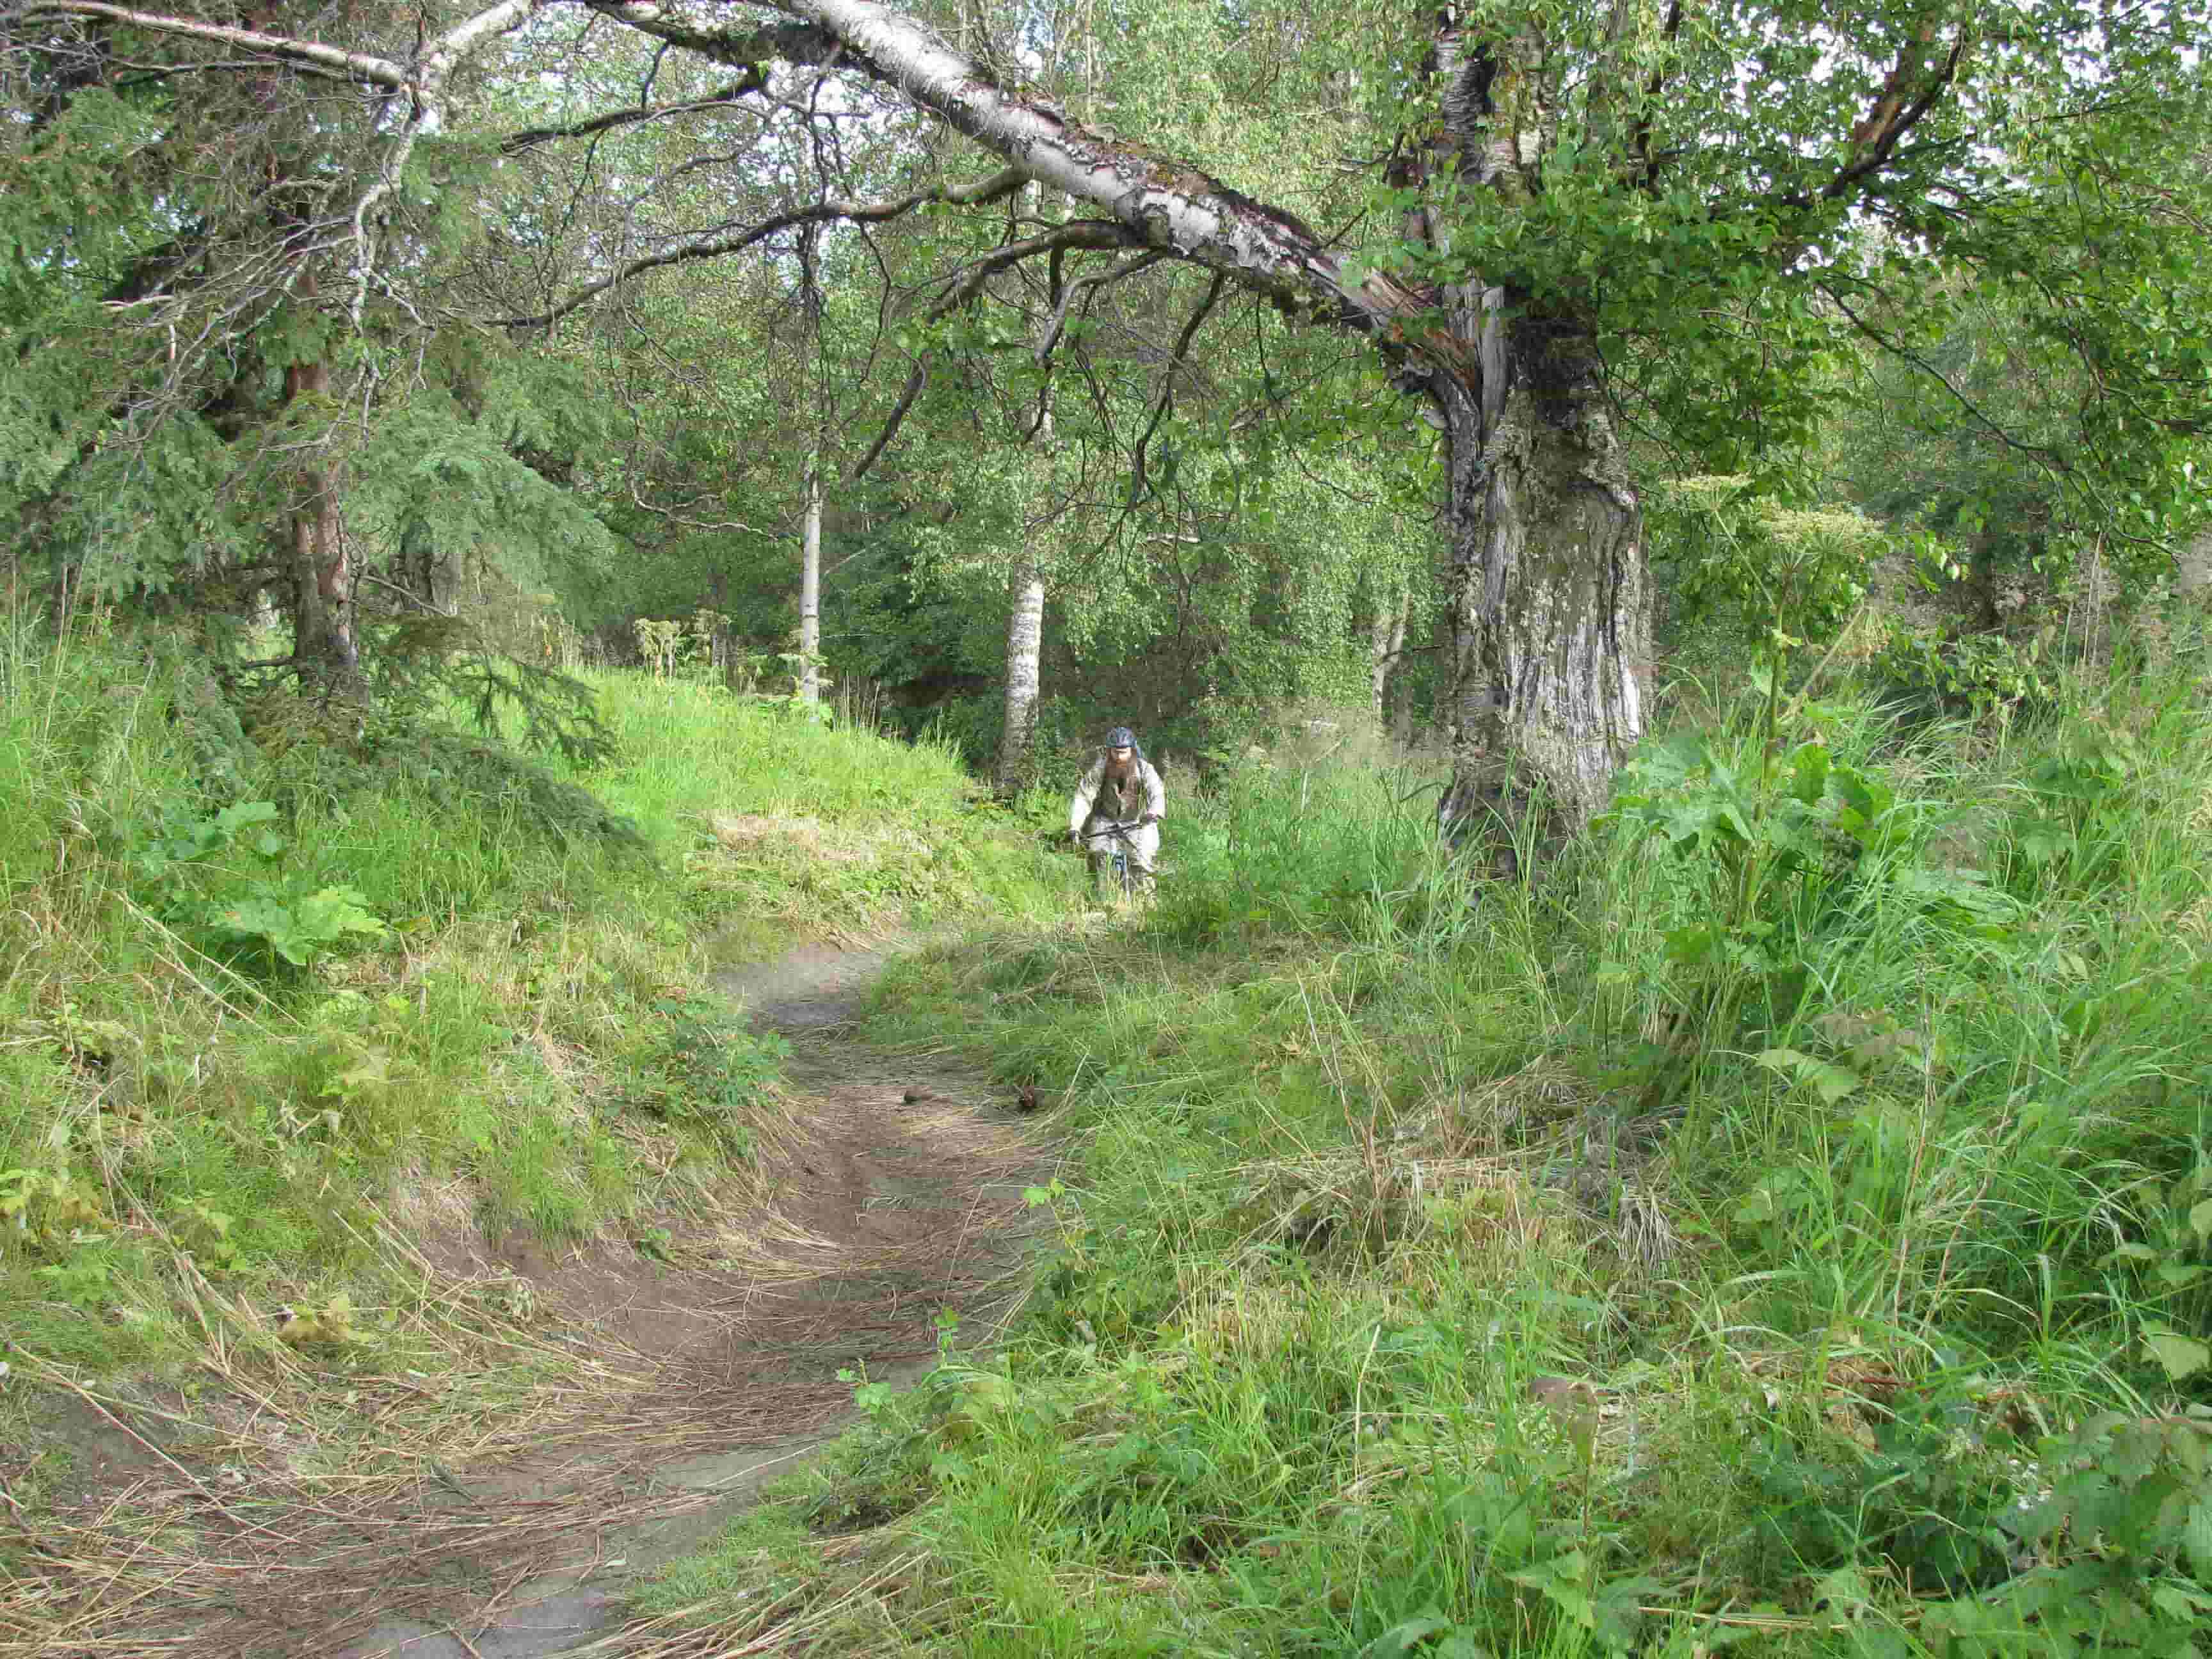 Front view of a cyclist riding a Surly bike on a dirt trail in grassy forest